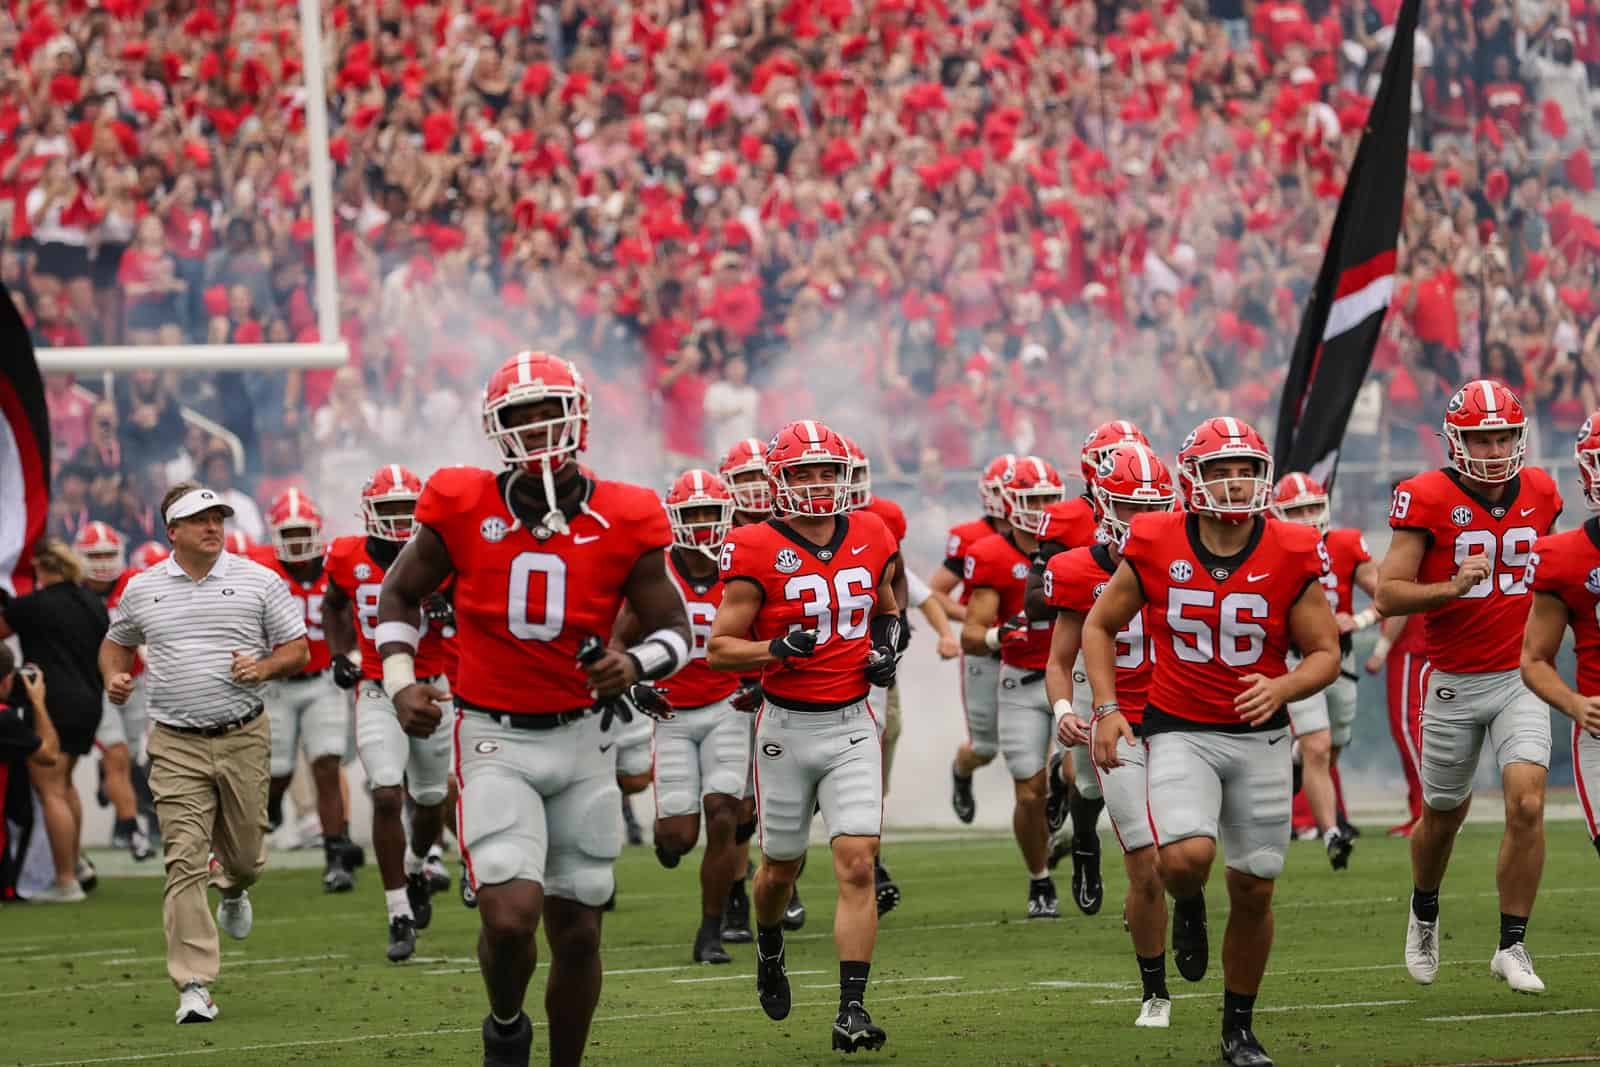 How To Watch Uga Football Today